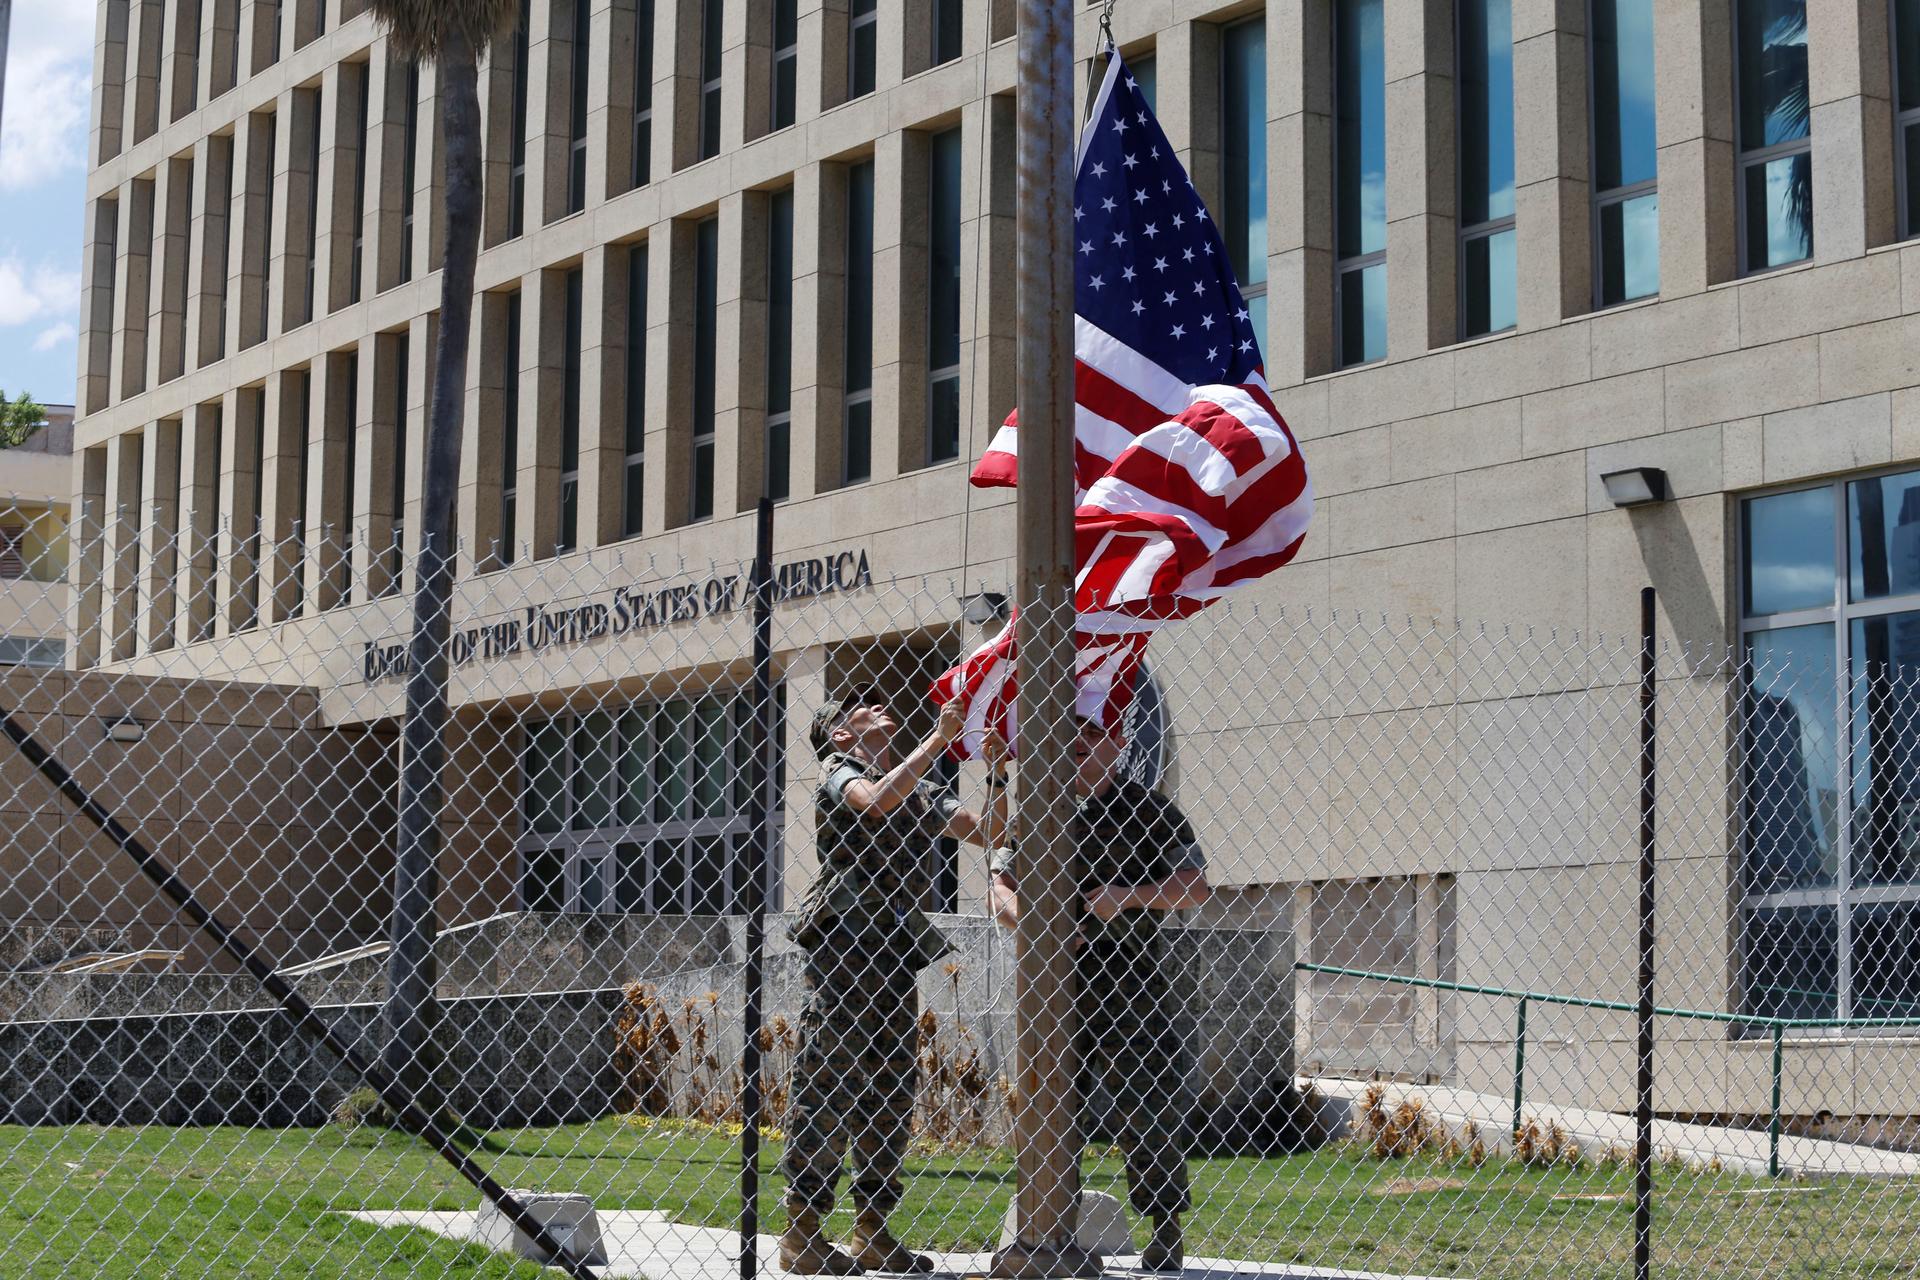 US Marines raise the American flag at half-staff at the US Embassy in Havana, Cuba, on Oct. 2, 2017.